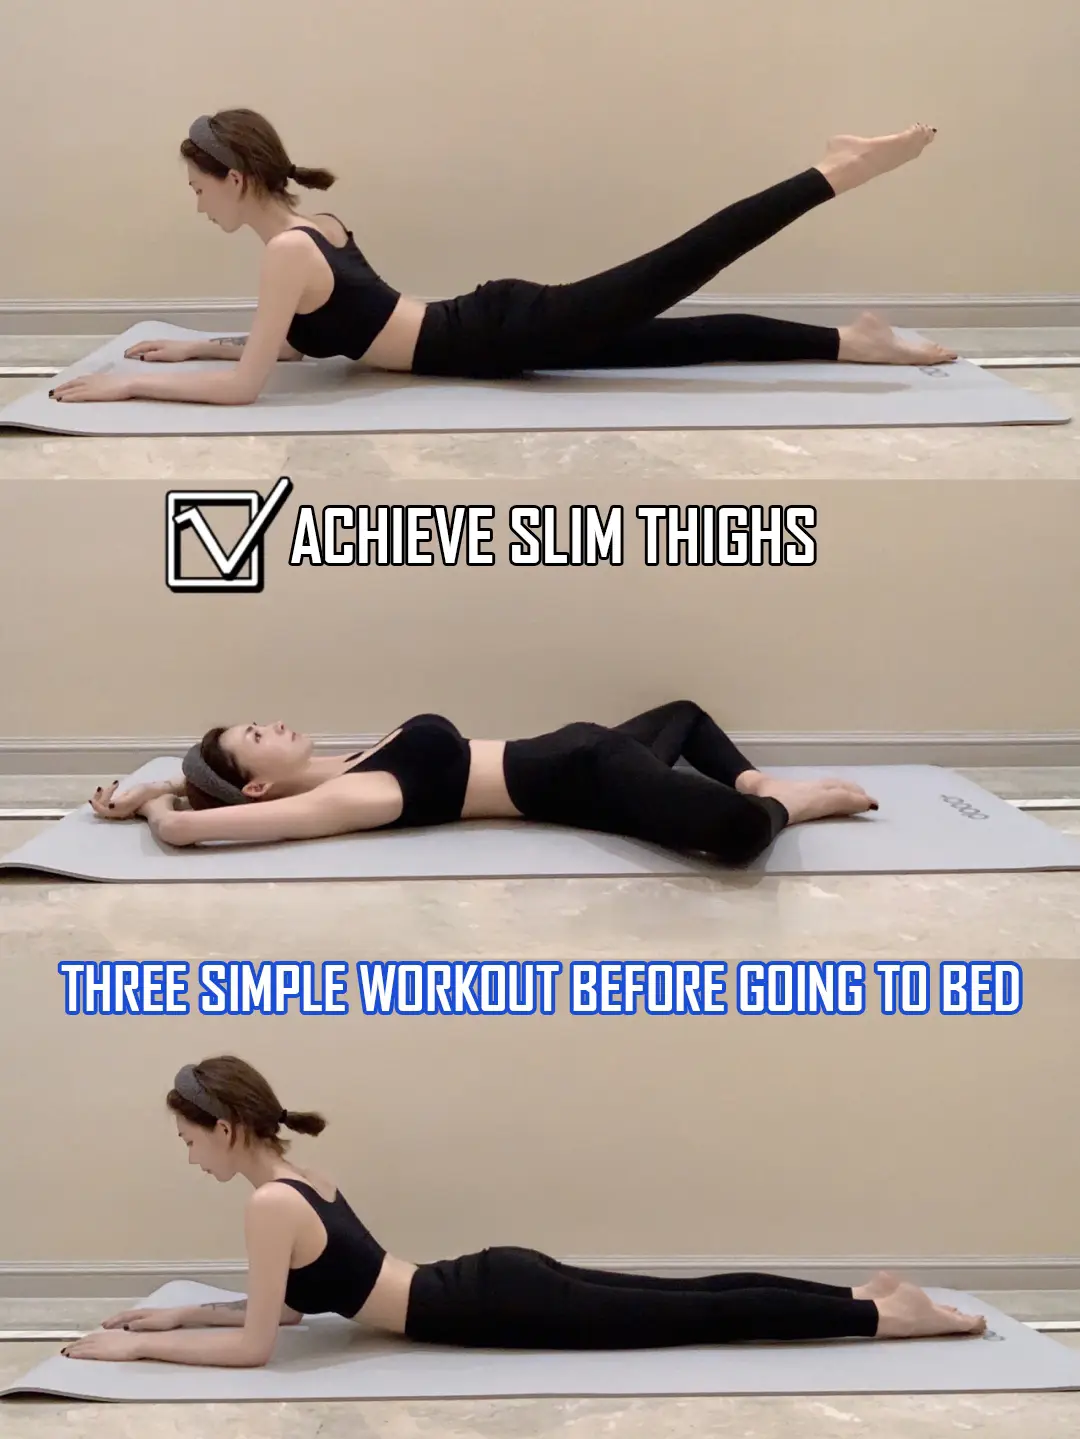 Say Goodbye to Dark Knees and Inner Thighs in Just 7 Days!